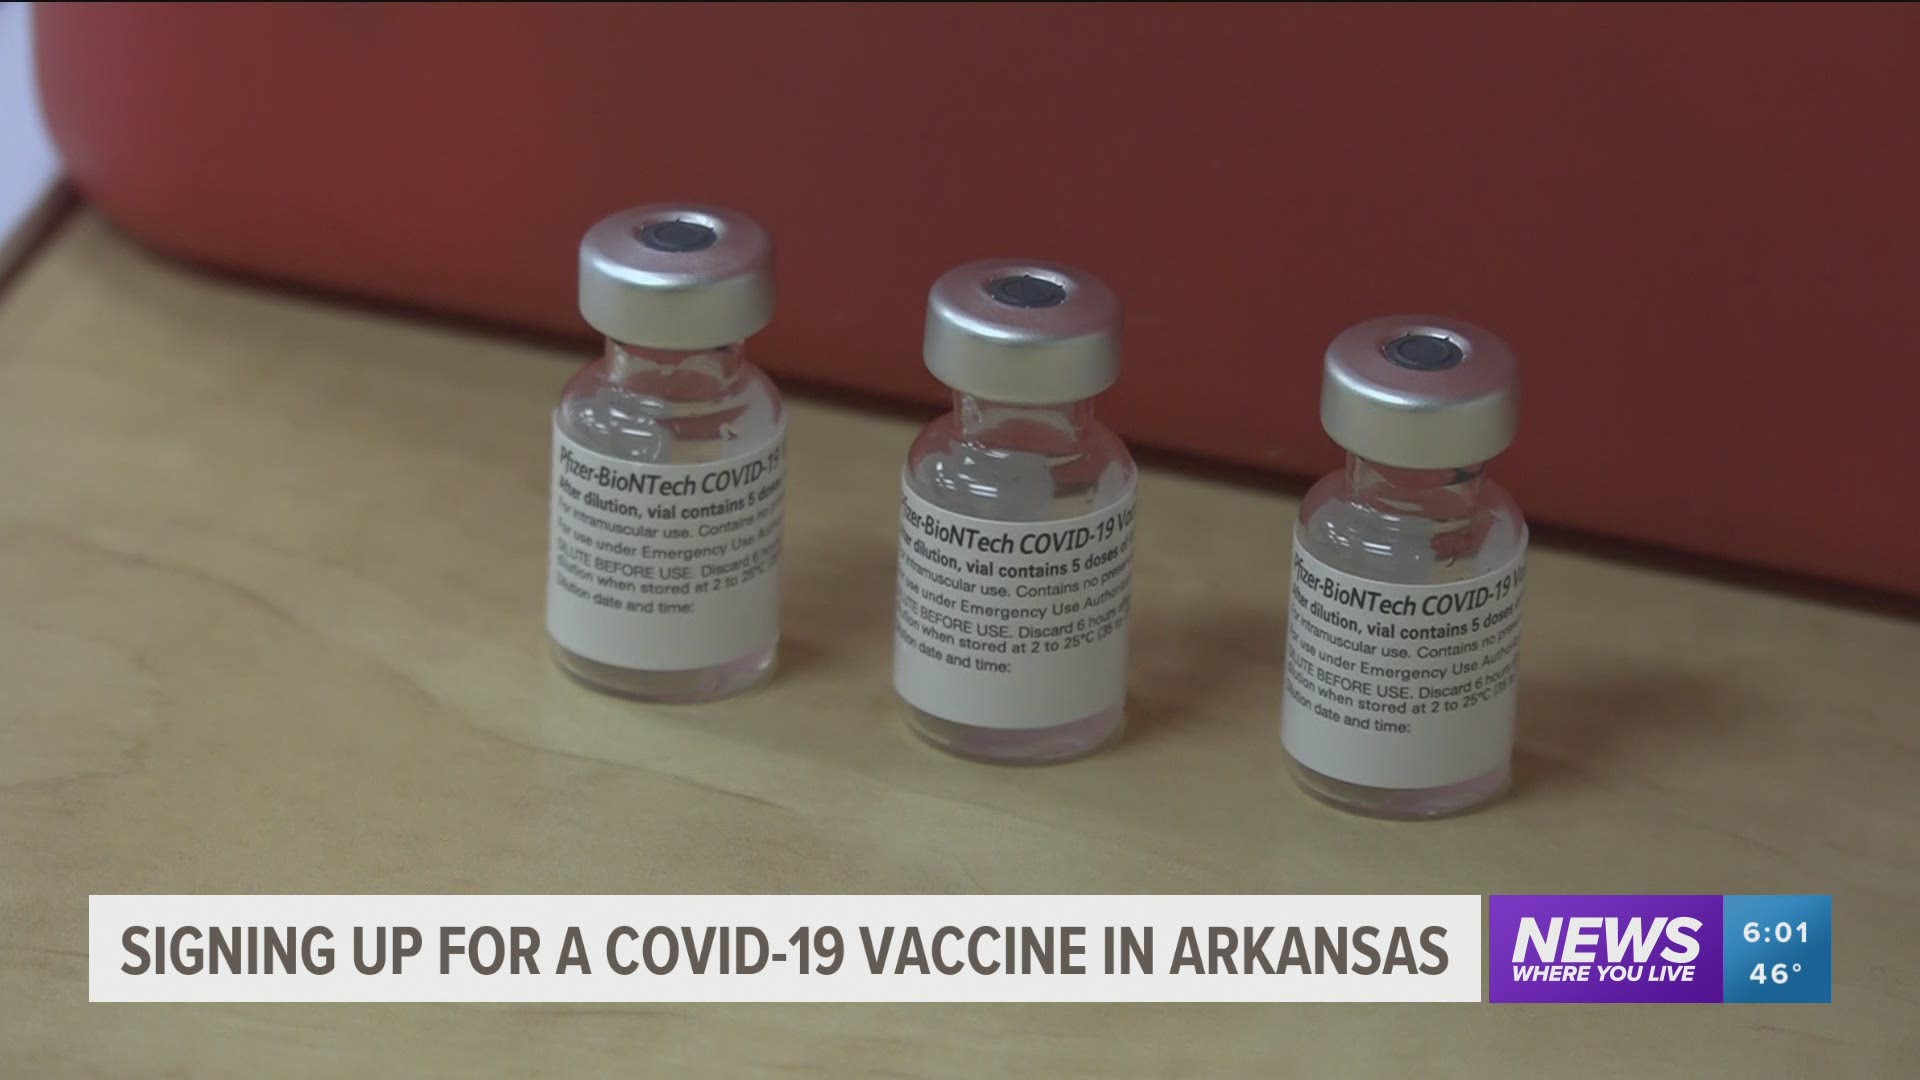 Many pharmacies already have thousands of people on their waiting list to get the vaccine in phase 1-B.